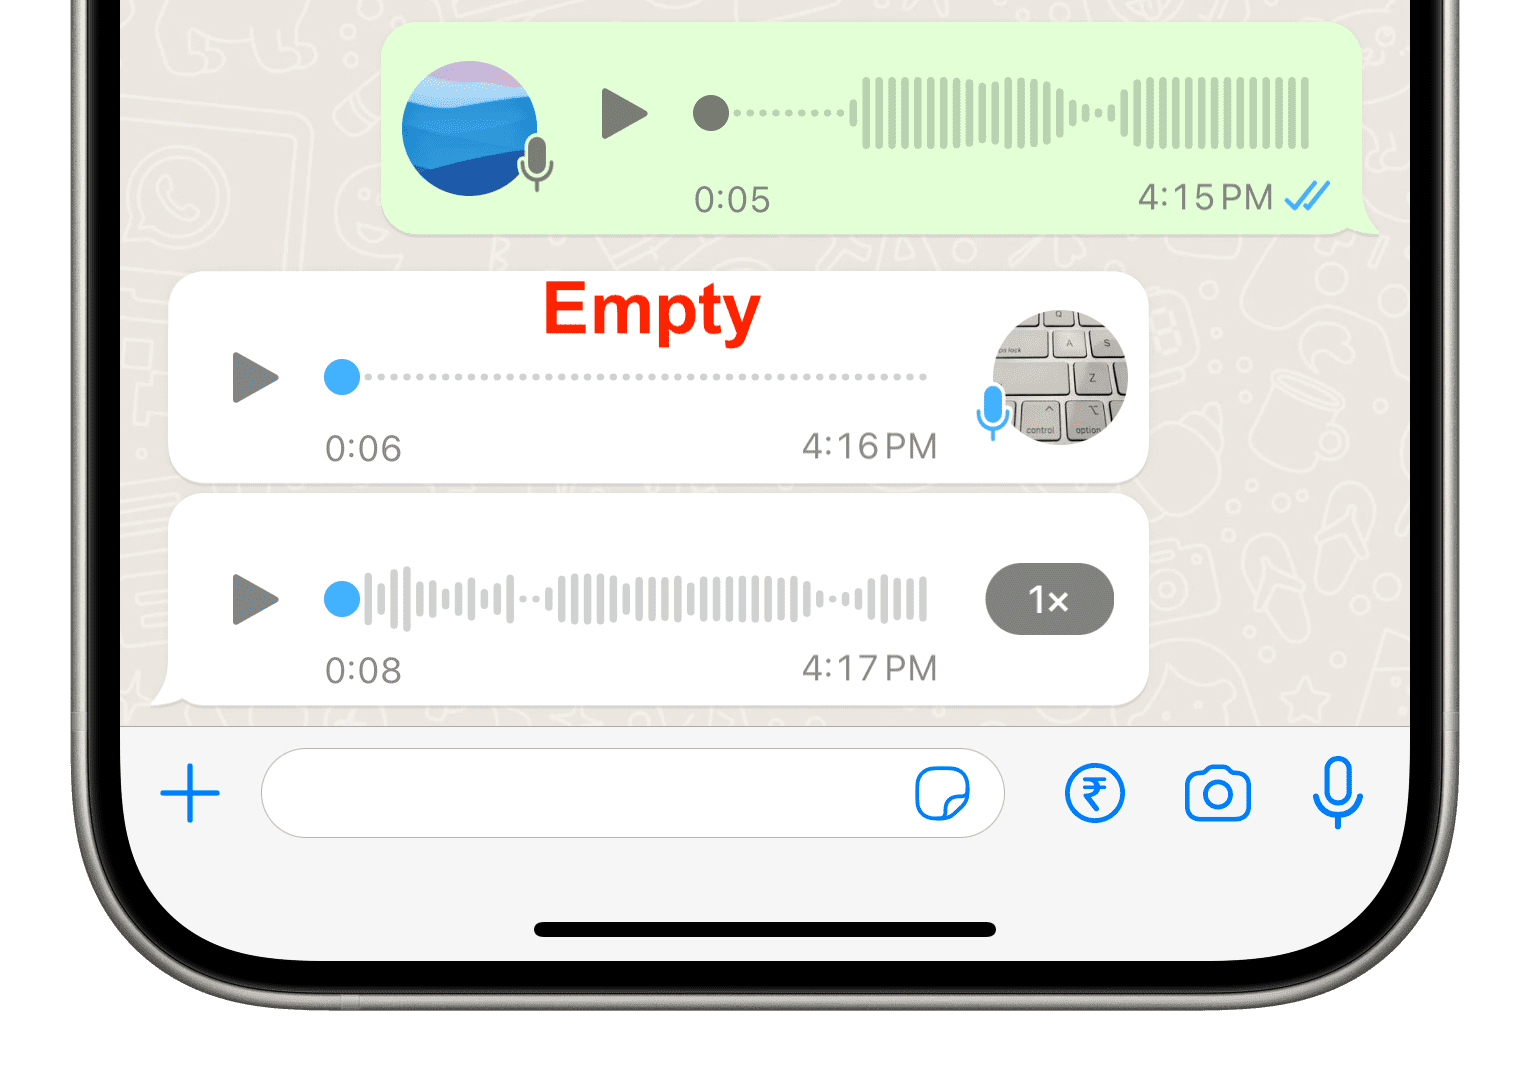 Blank and useful audio messages on WhatsApp